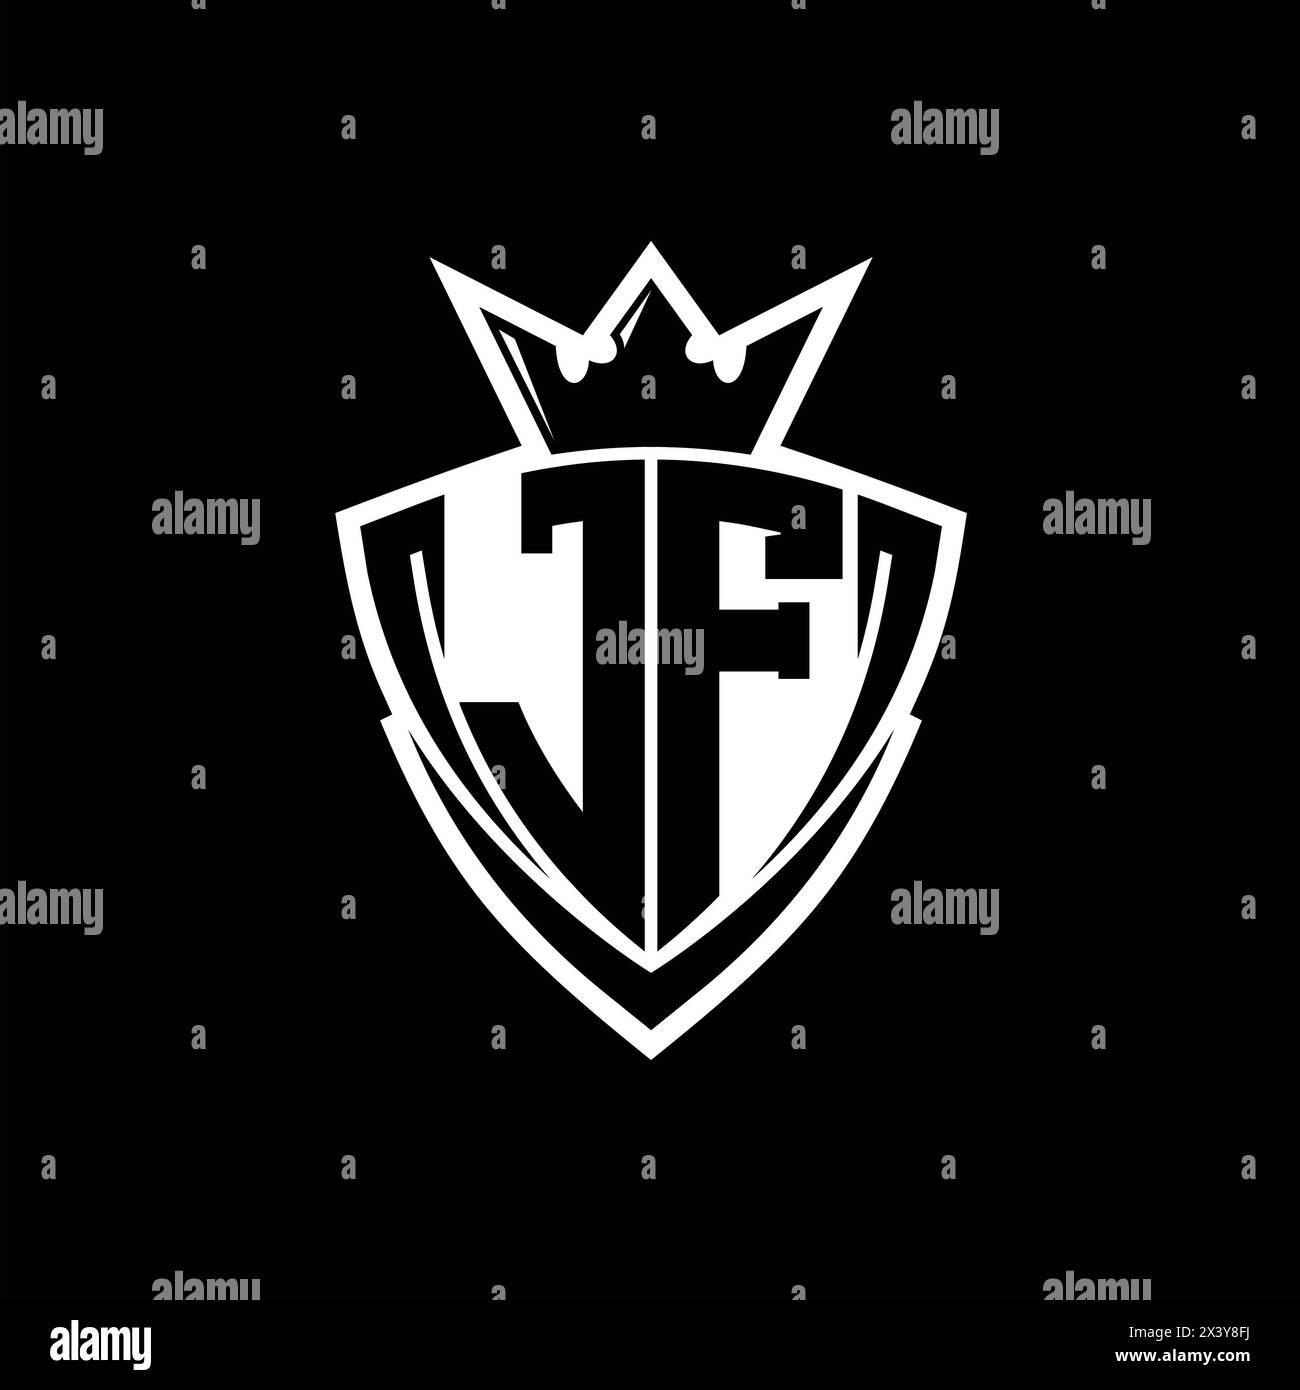 JF Bold letter logo with sharp triangle shield shape with crown inside white outline on black background template design Stock Photo